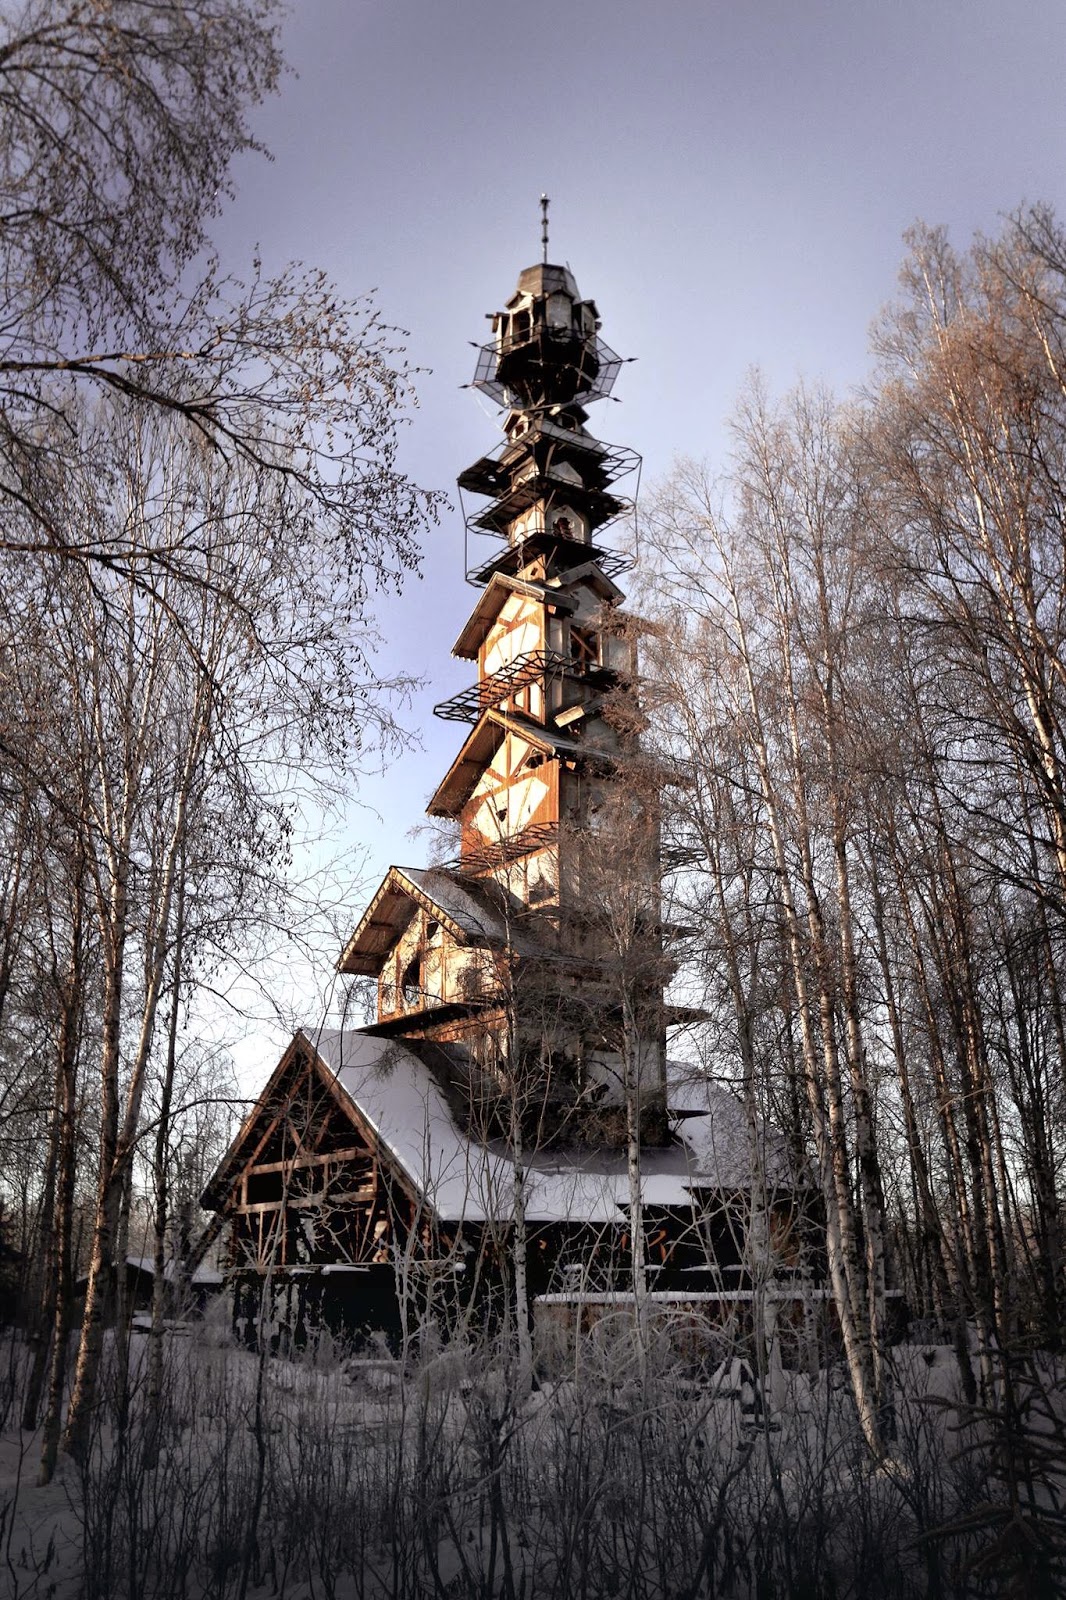 A Towering Home in the Alaskan Wilderness Looks Like Something Right out of a Dr. Seuss Book